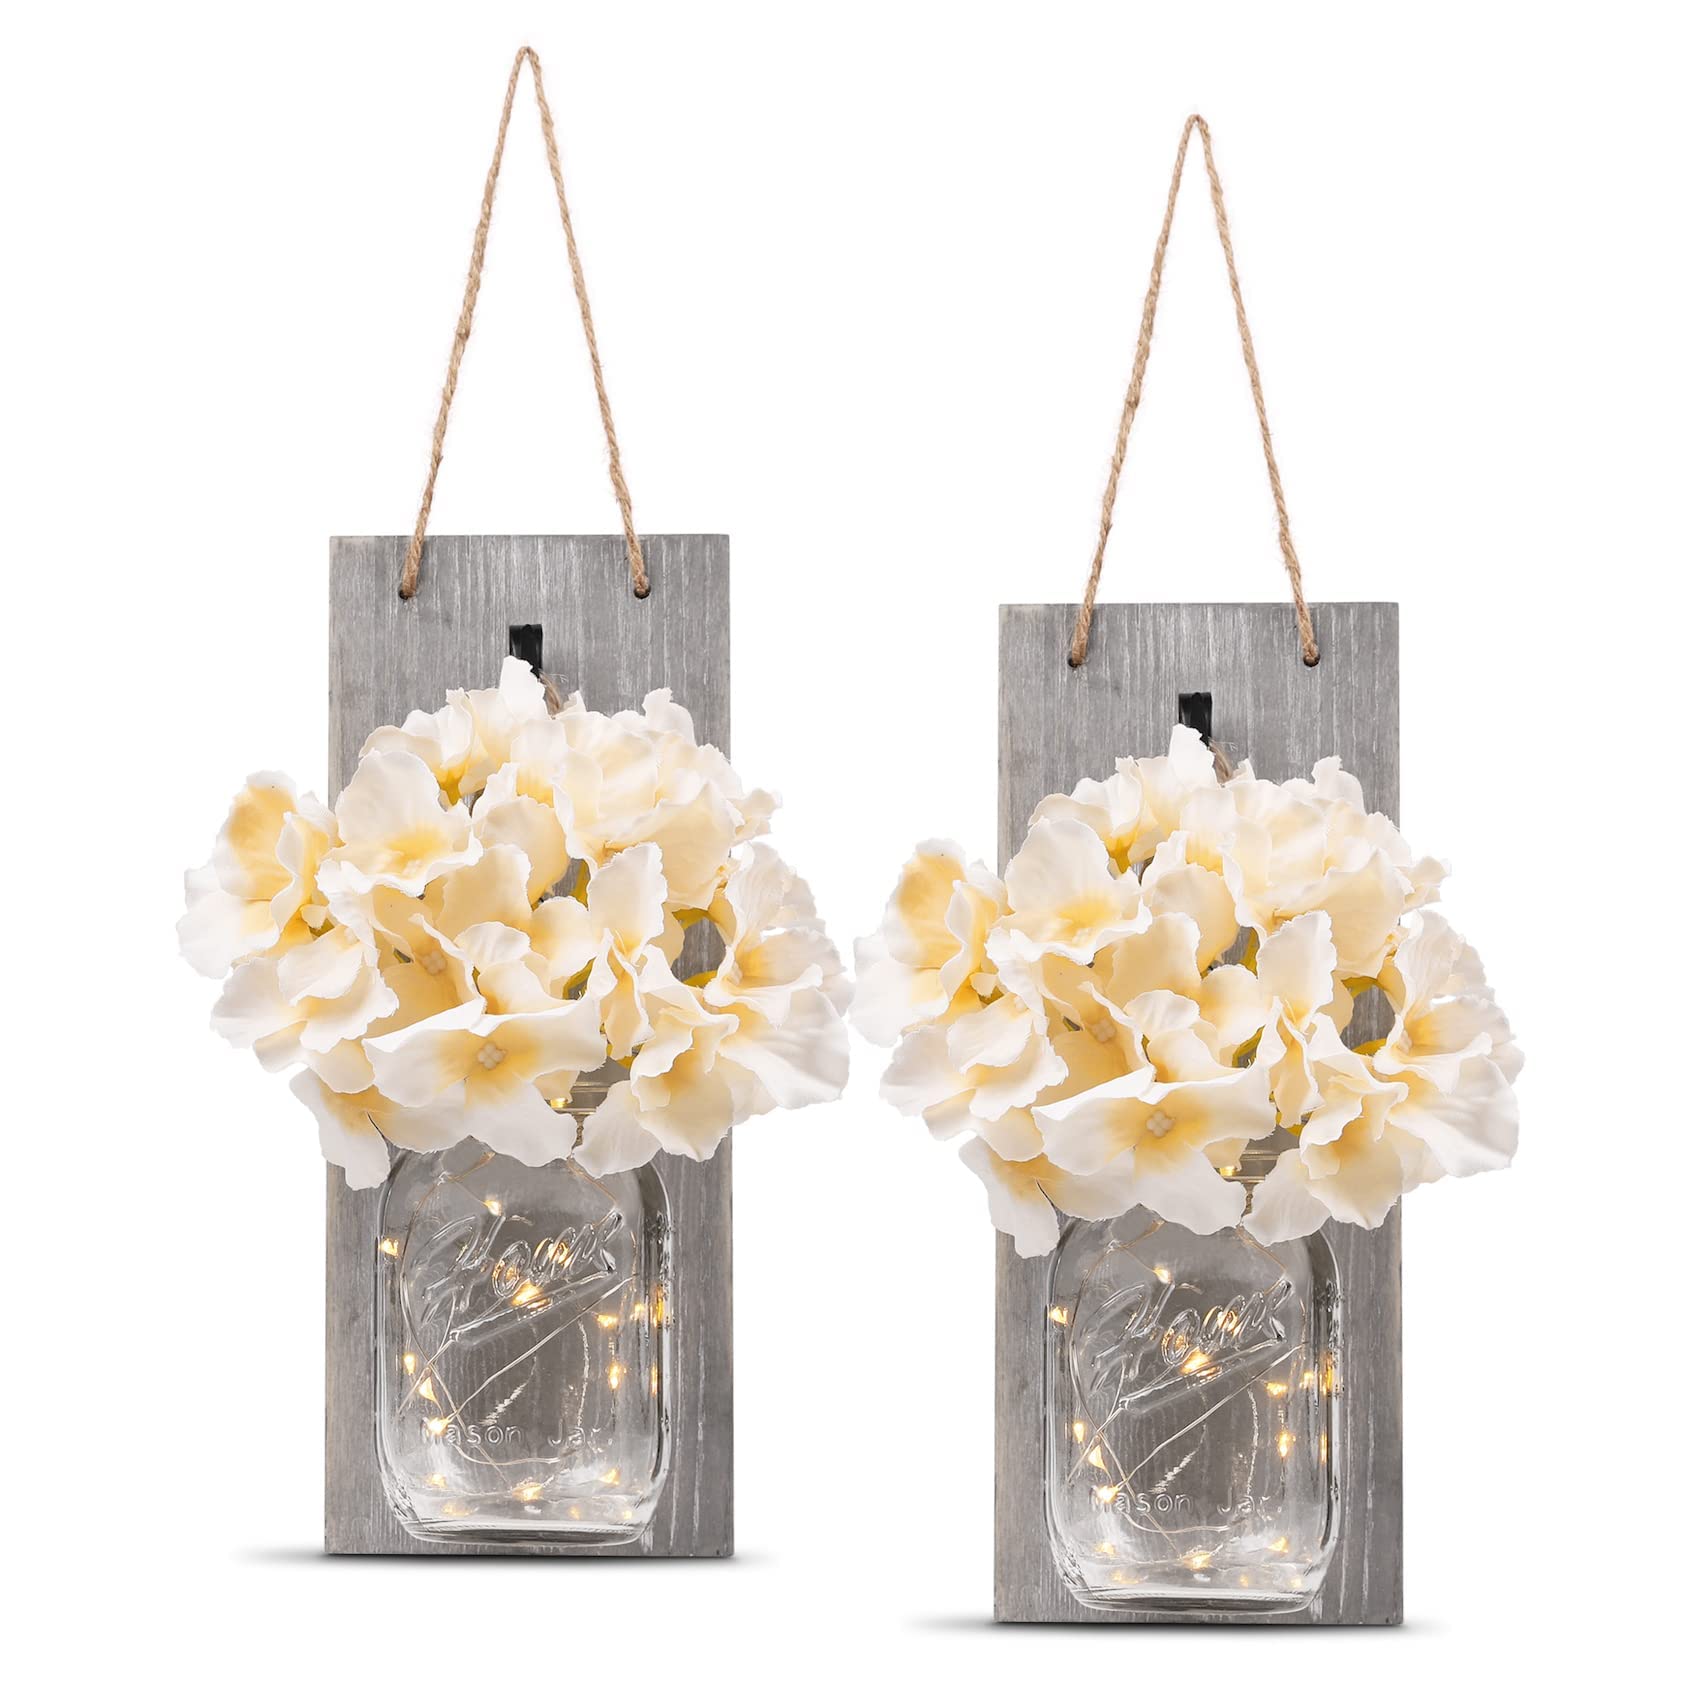 Book Cover HOMKO Decorative Mason Jar Wall Decor - Rustic Wall Sconces with 6-Hour Timer LED Fairy Lights and Flowers - Farmhouse Home Decor (Set of 2) Gray Medium